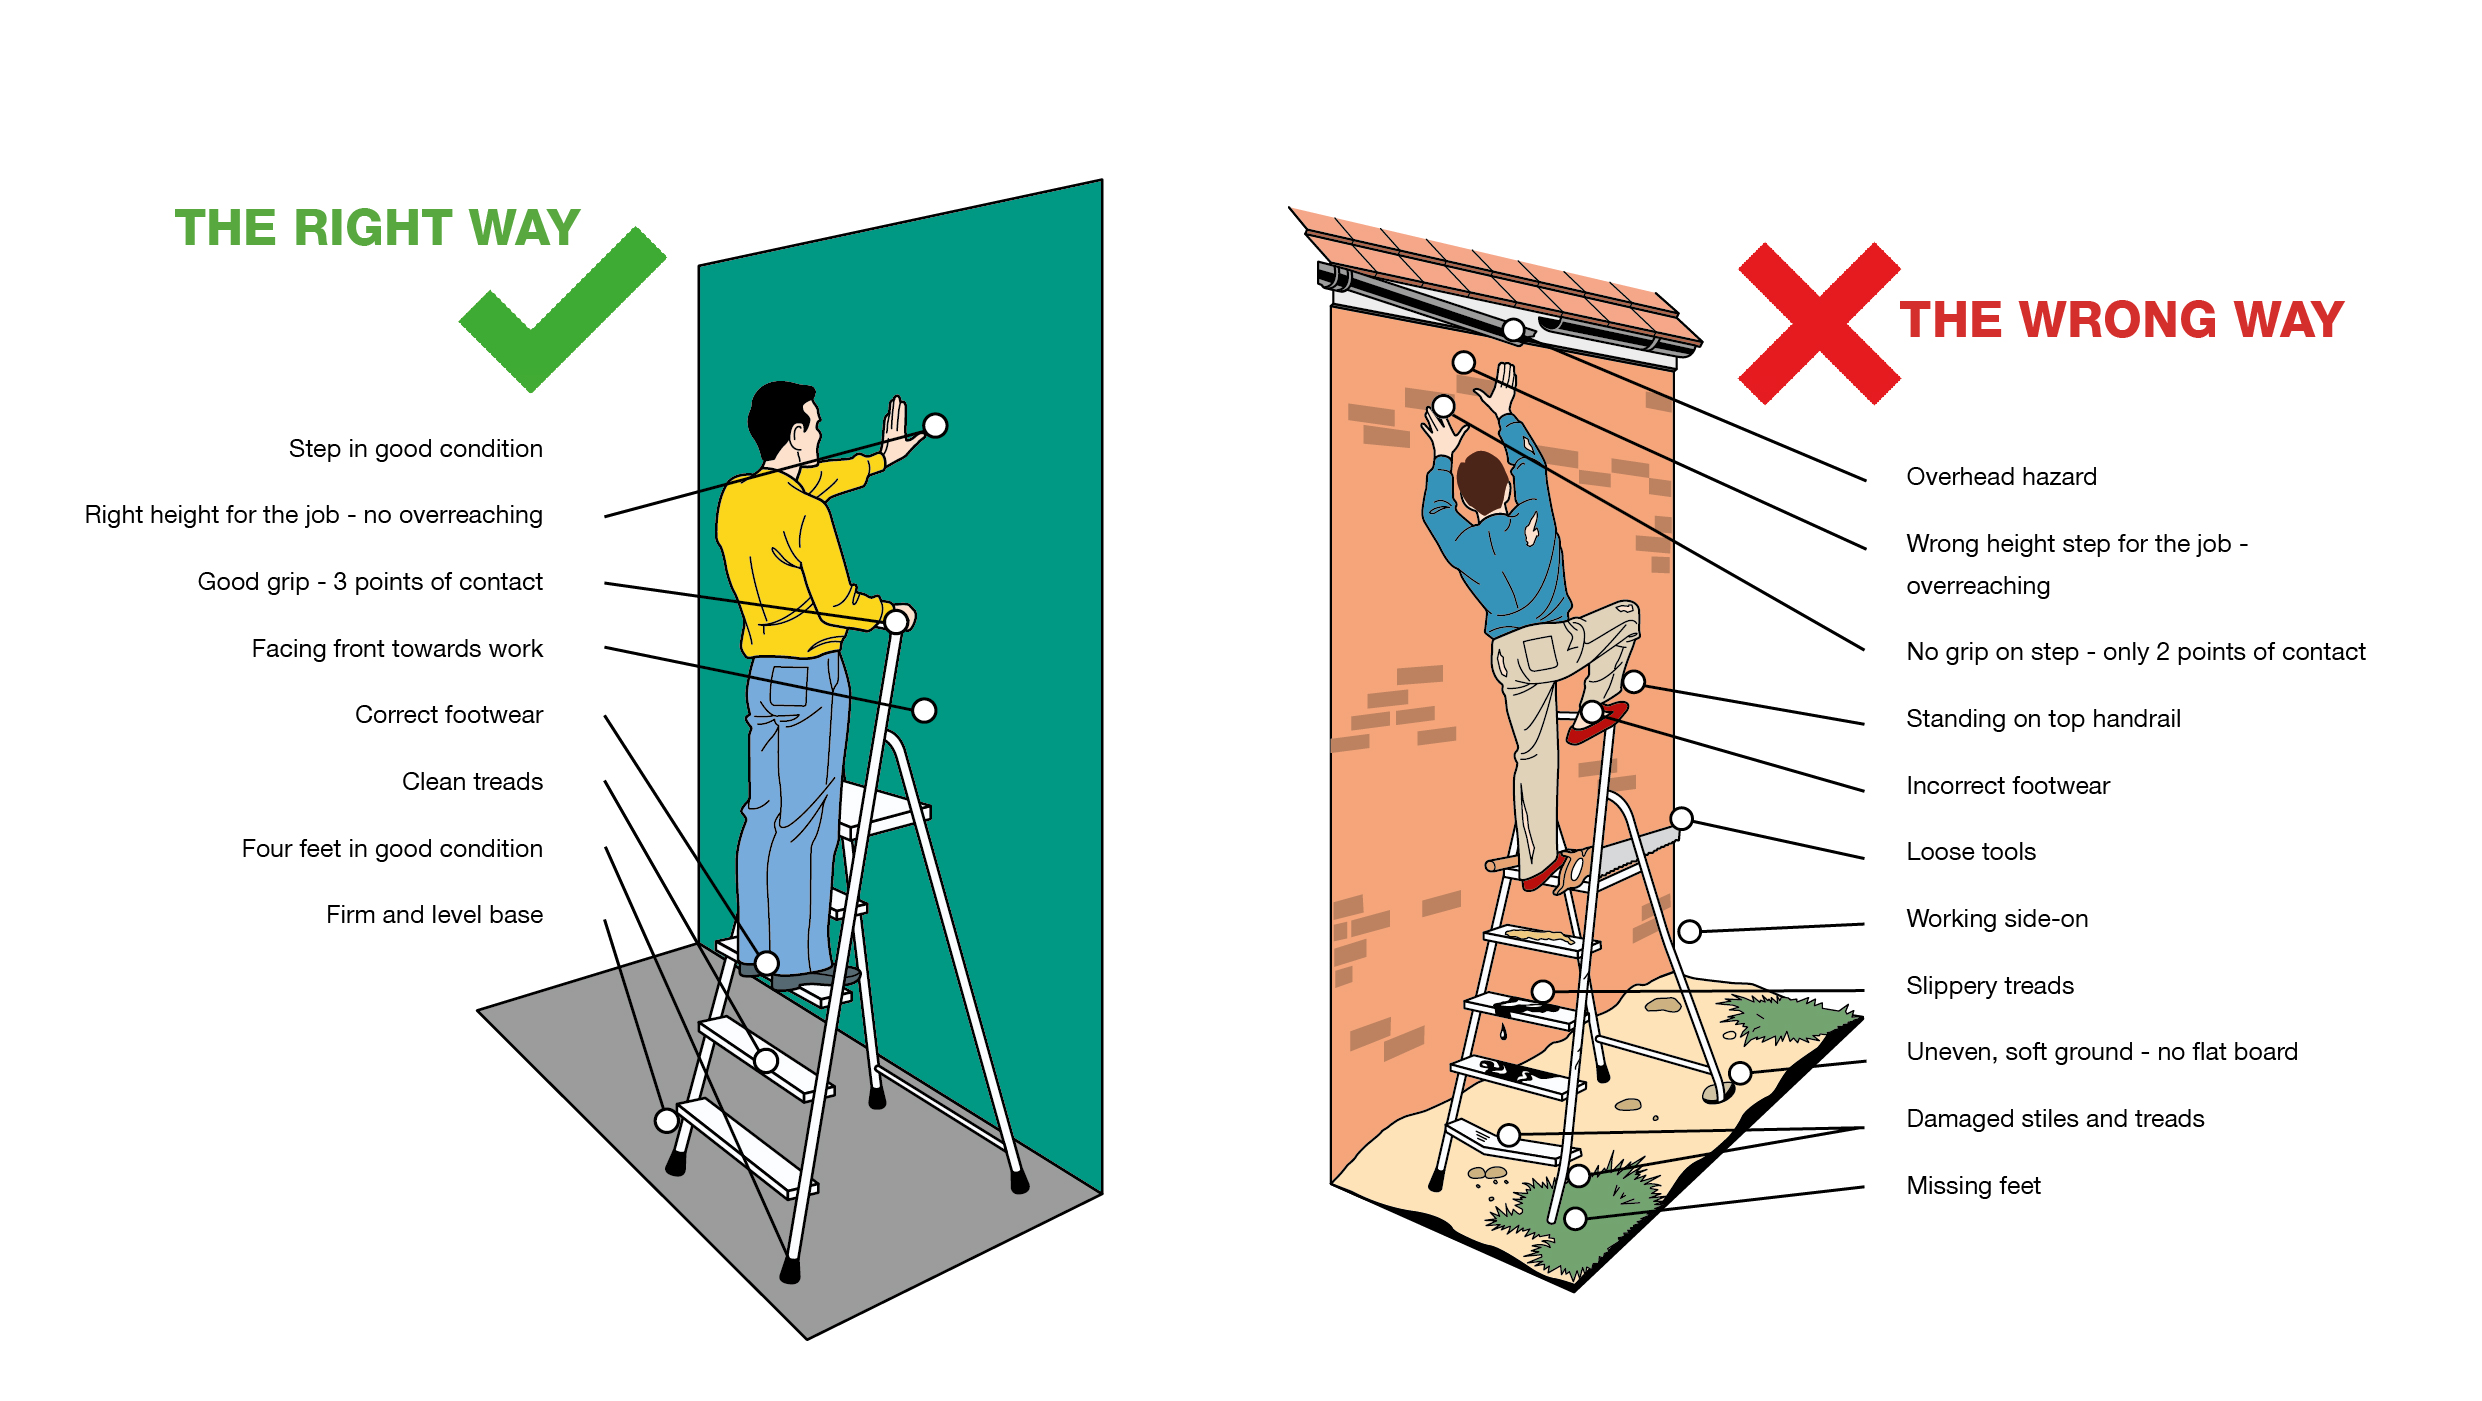 How To Properly Use A Safety Ladder